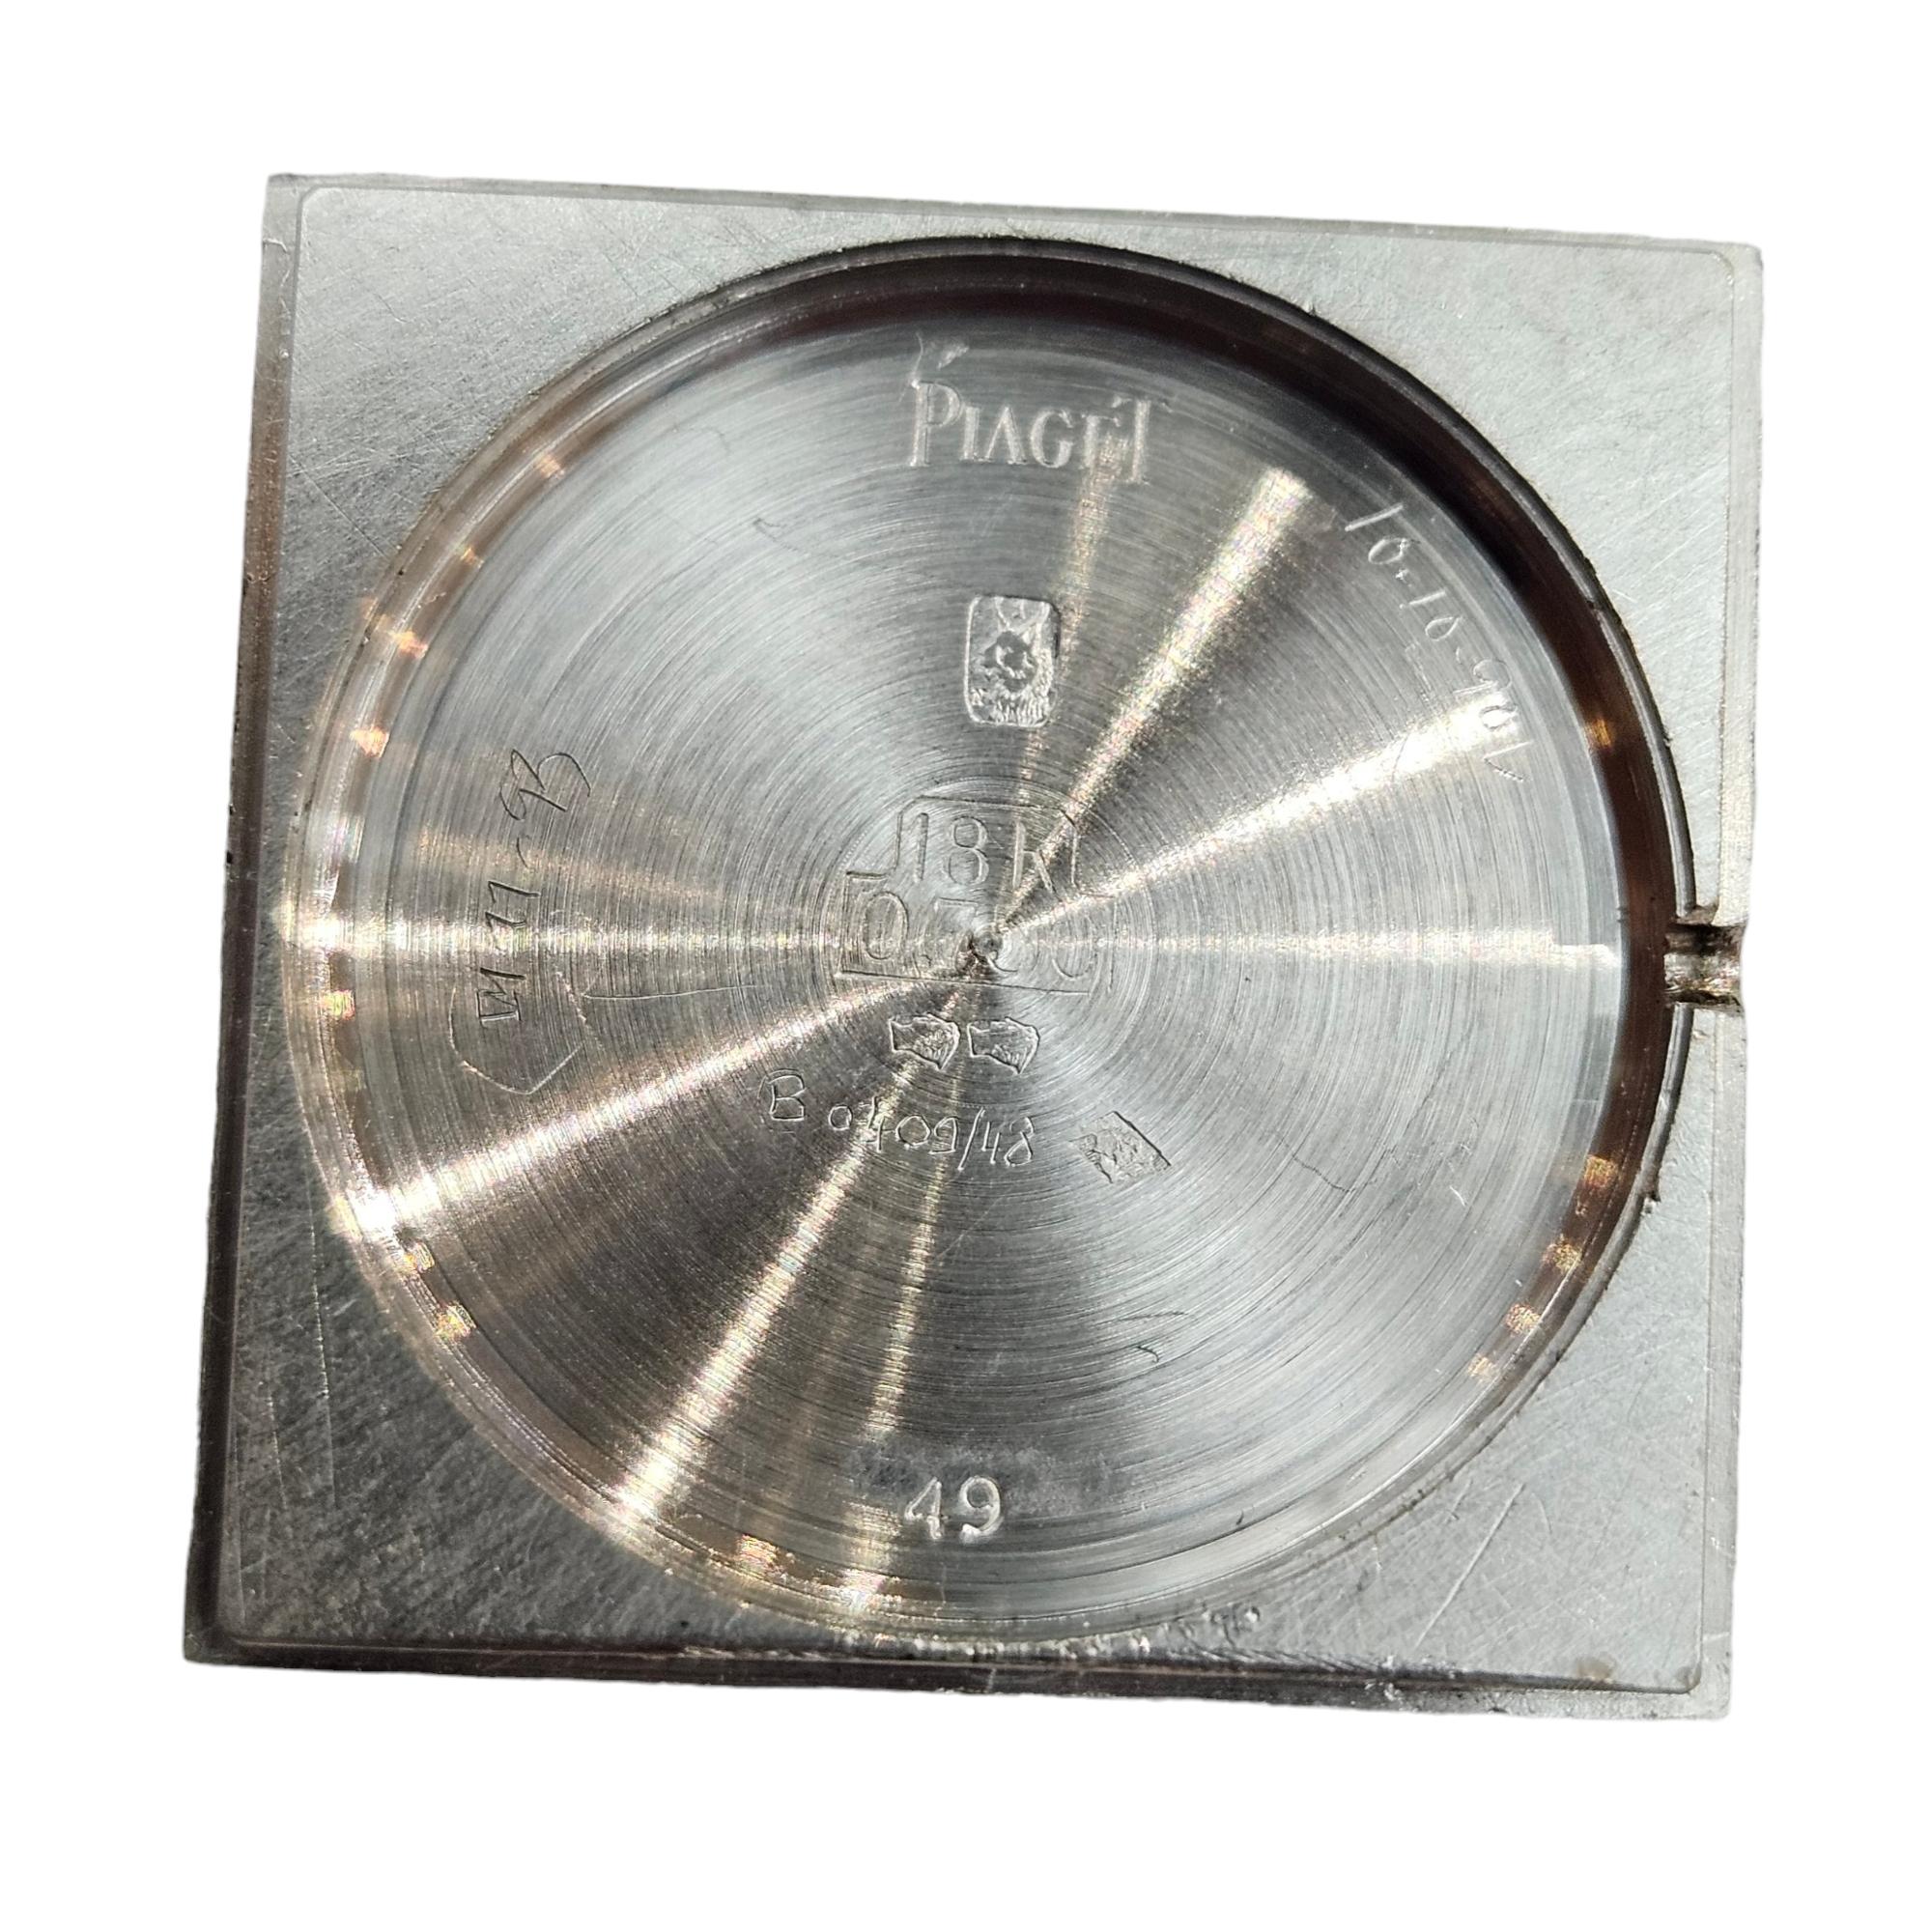 18 Kt White Gold Piaget Protocole Wrist Watch, Manual Winding For Sale 6